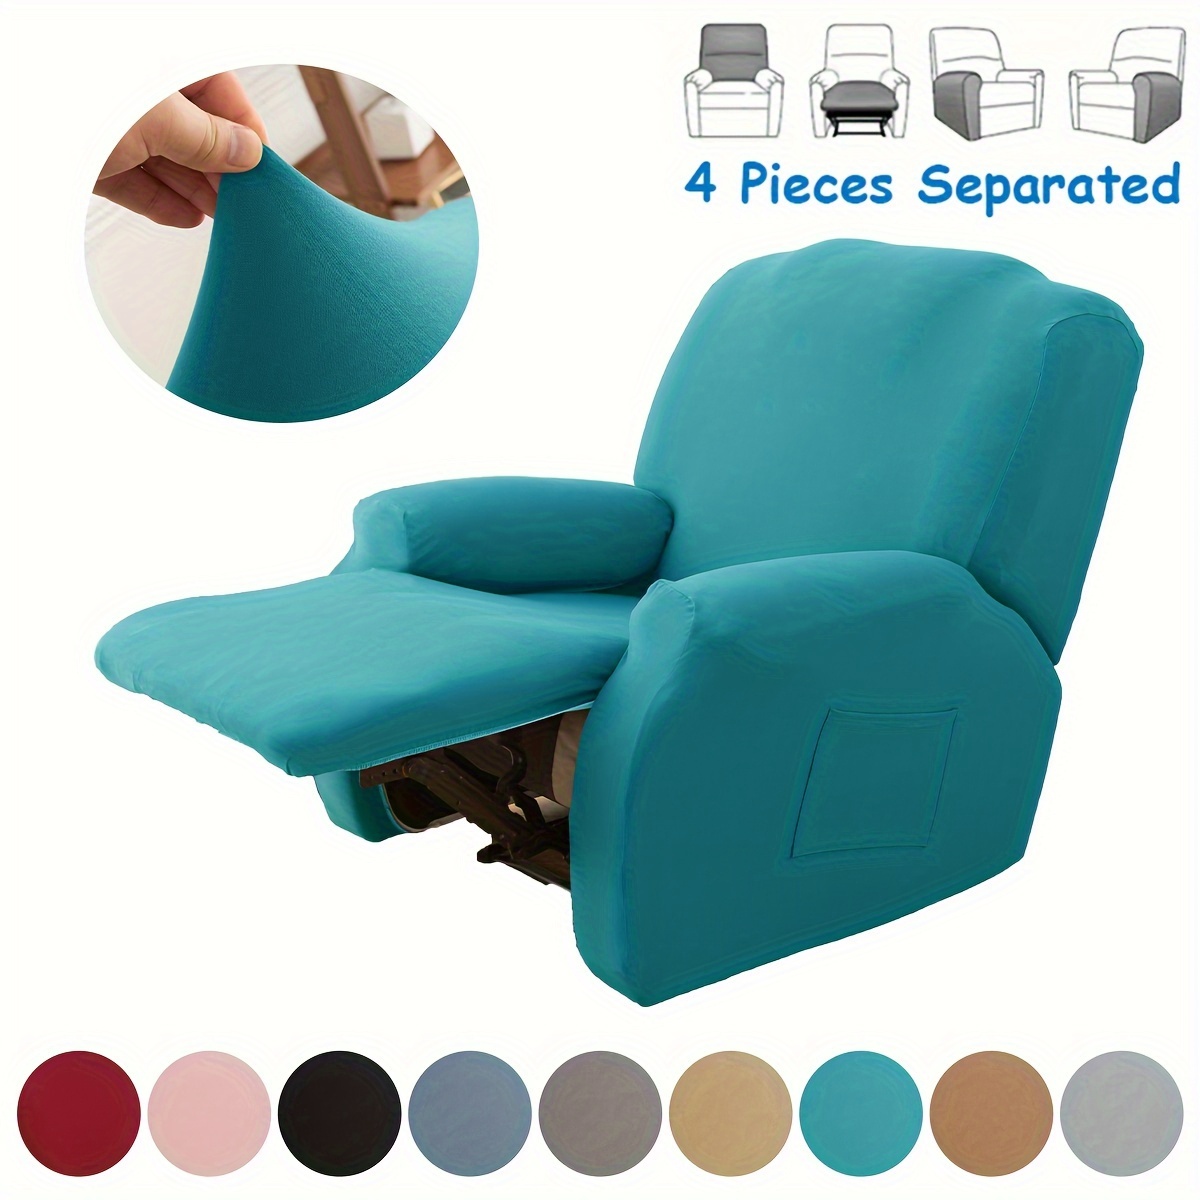 

4pcs/set Stretch Recliner Cover, Solid Color Sofa Slipcover, Recliner Protective Cover, Suitable For Bedroom, Office, Living Room, Home Decor